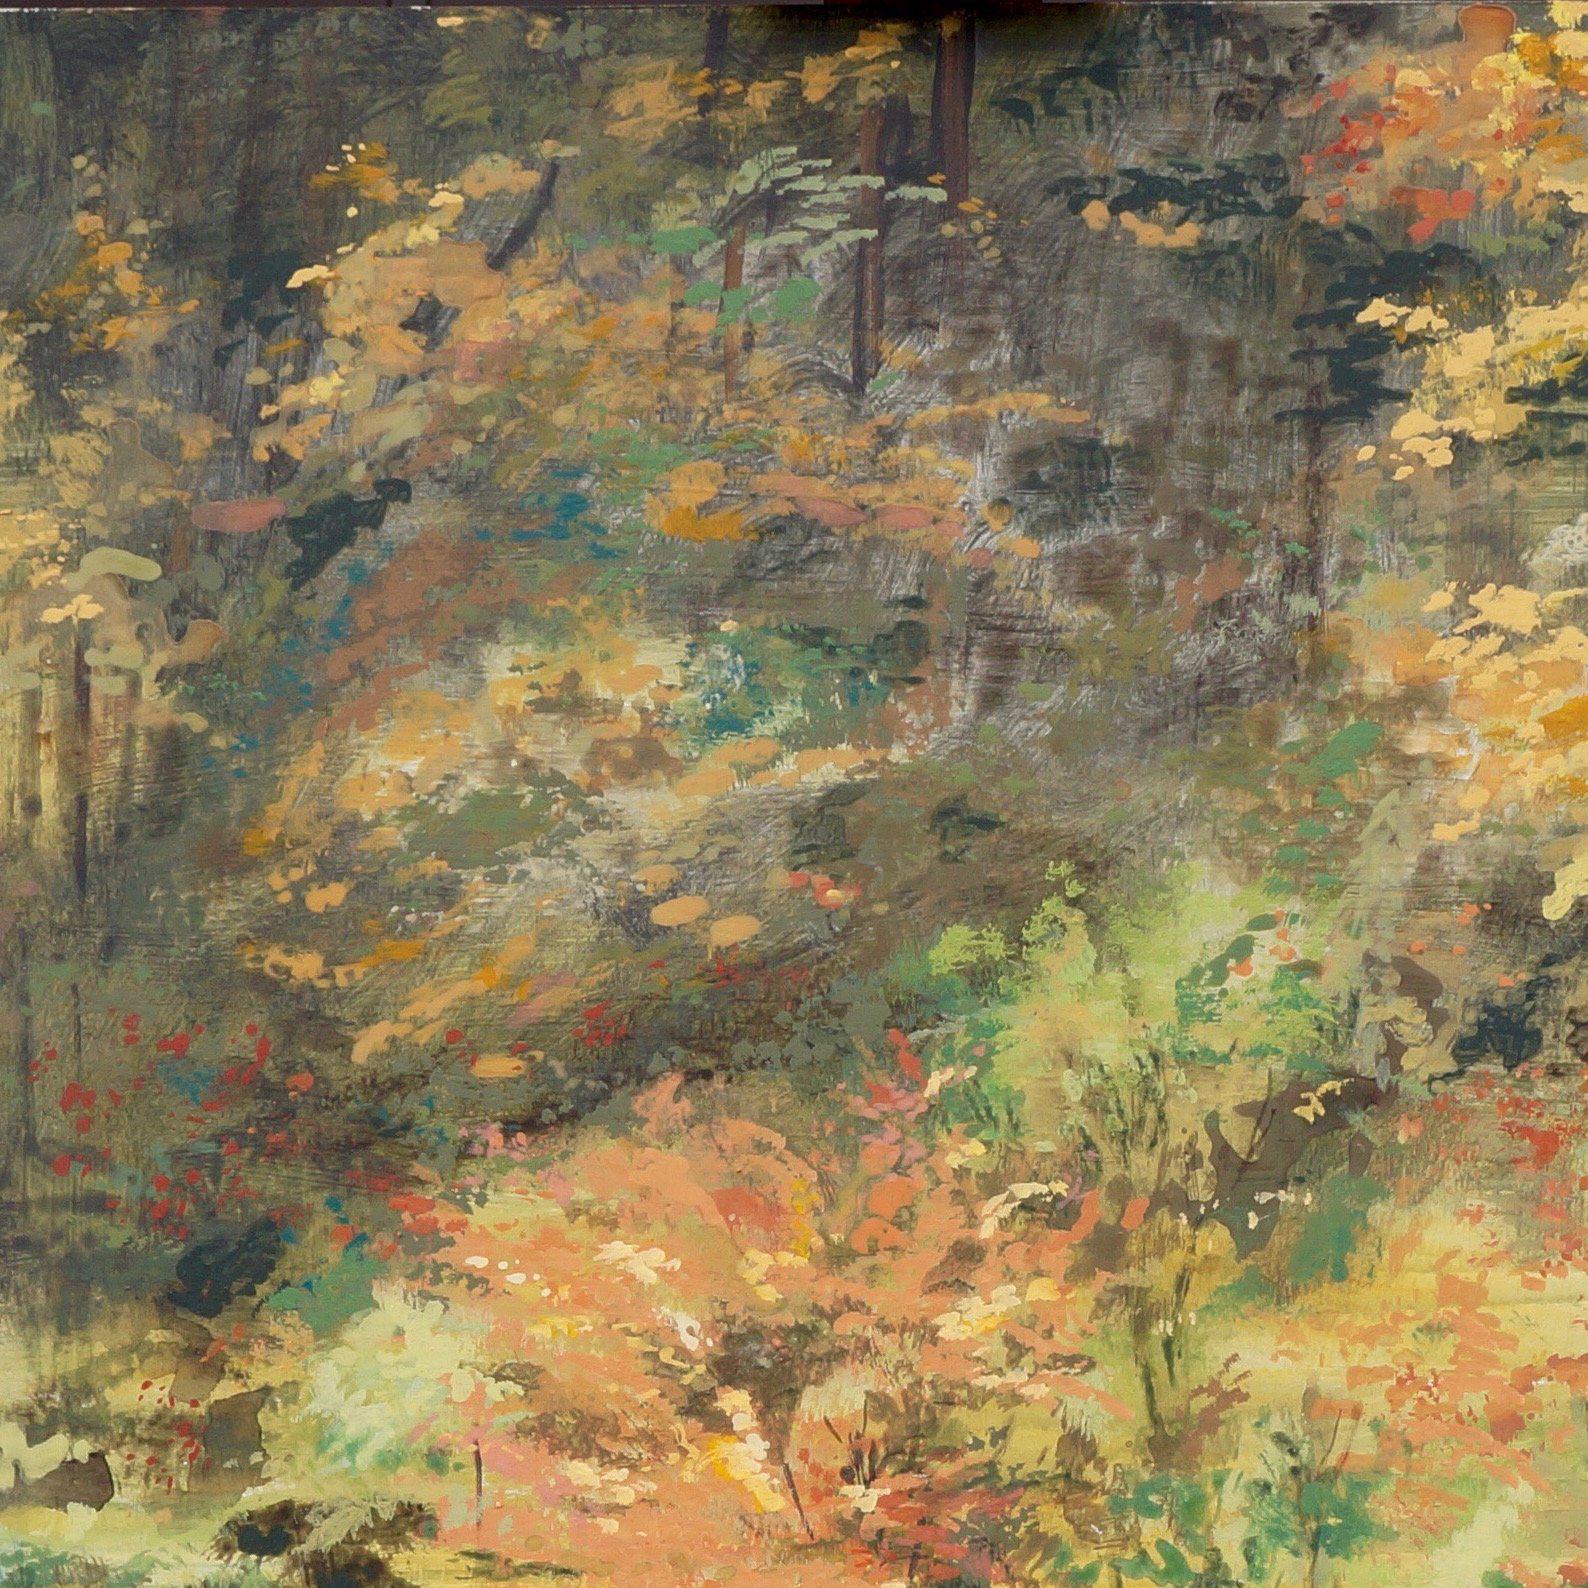 <p>Artist Comments<br />This is a Japanese-style garden with a pond reflecting the fall foliage.  I painted it in delicate colors to emphasize the serenity of such gardens.</p><br /><p>About the Artist<br />English artist Sidonie Caron lives in the